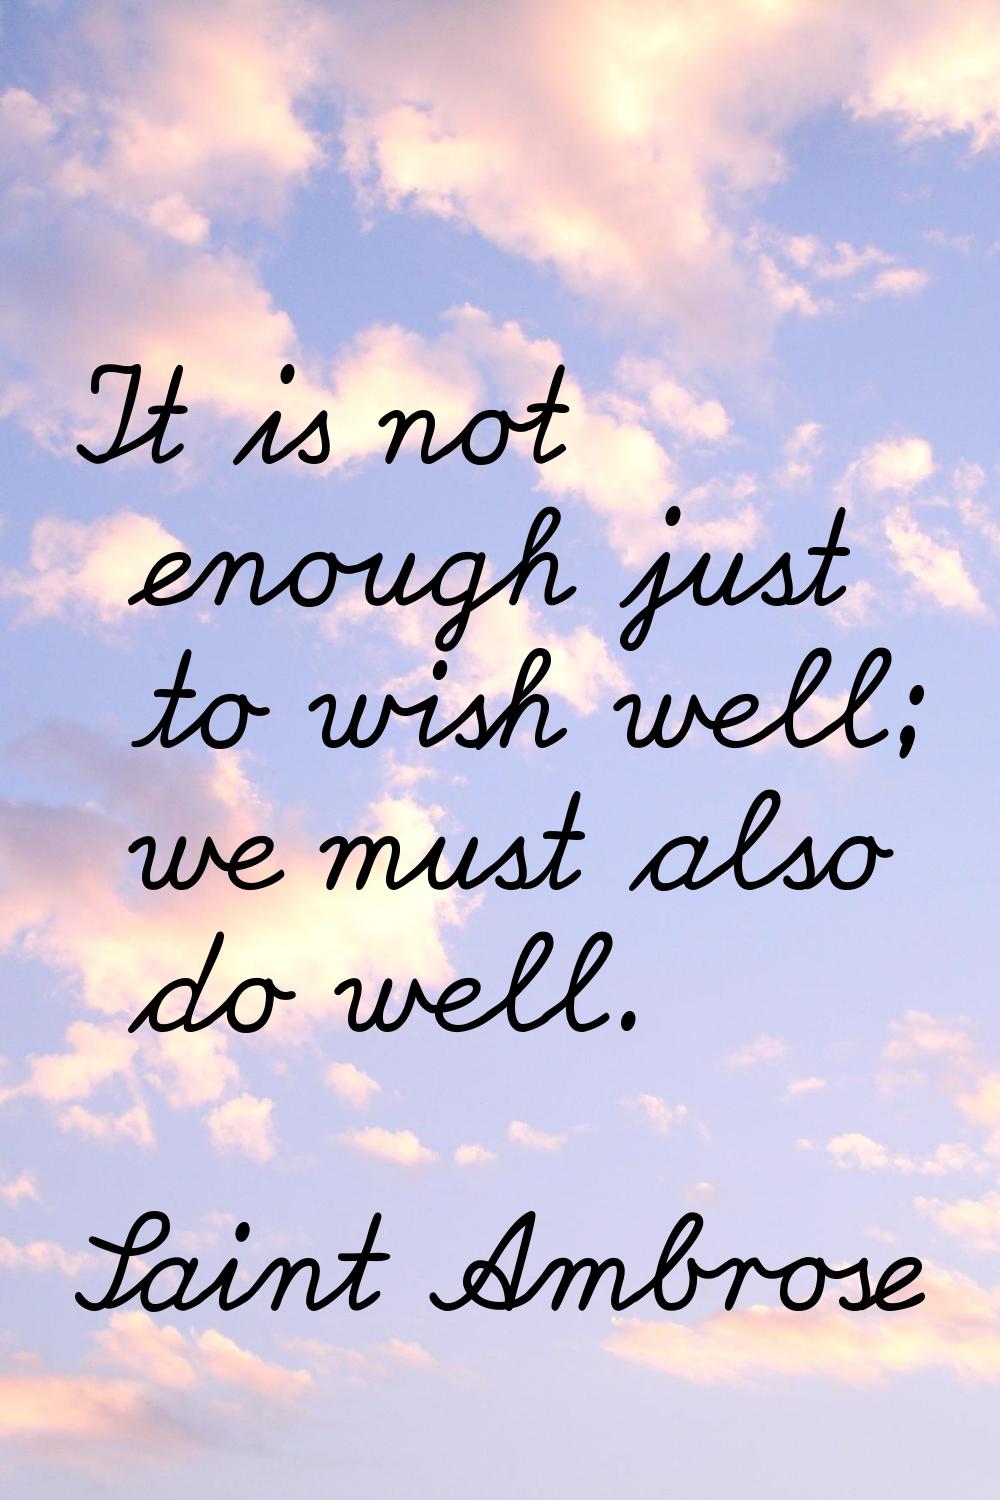 It is not enough just to wish well; we must also do well.